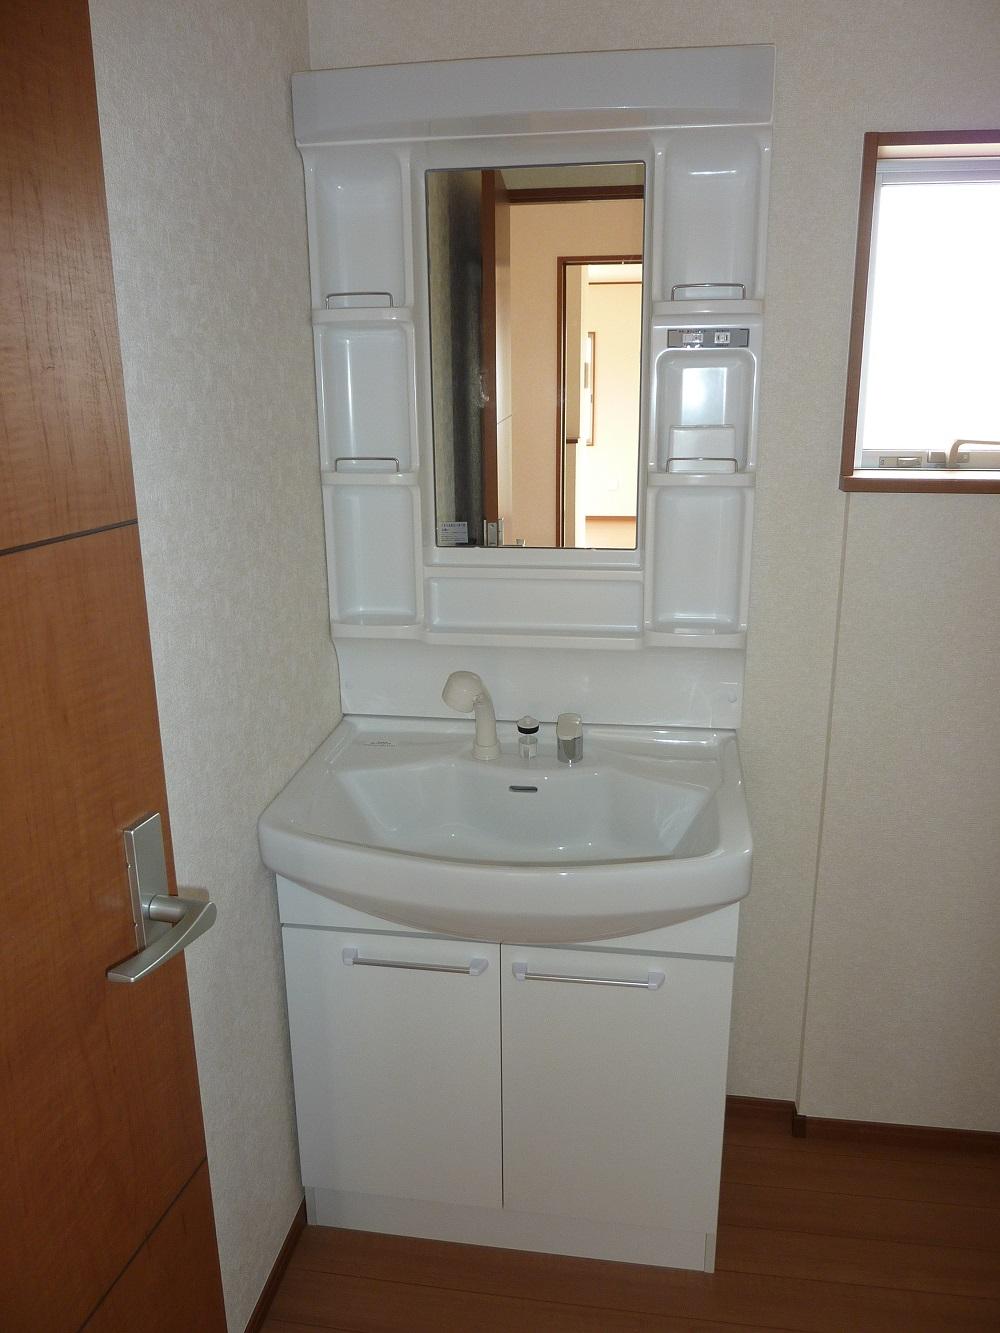 Wash basin, toilet. Same specifications is a picture! 